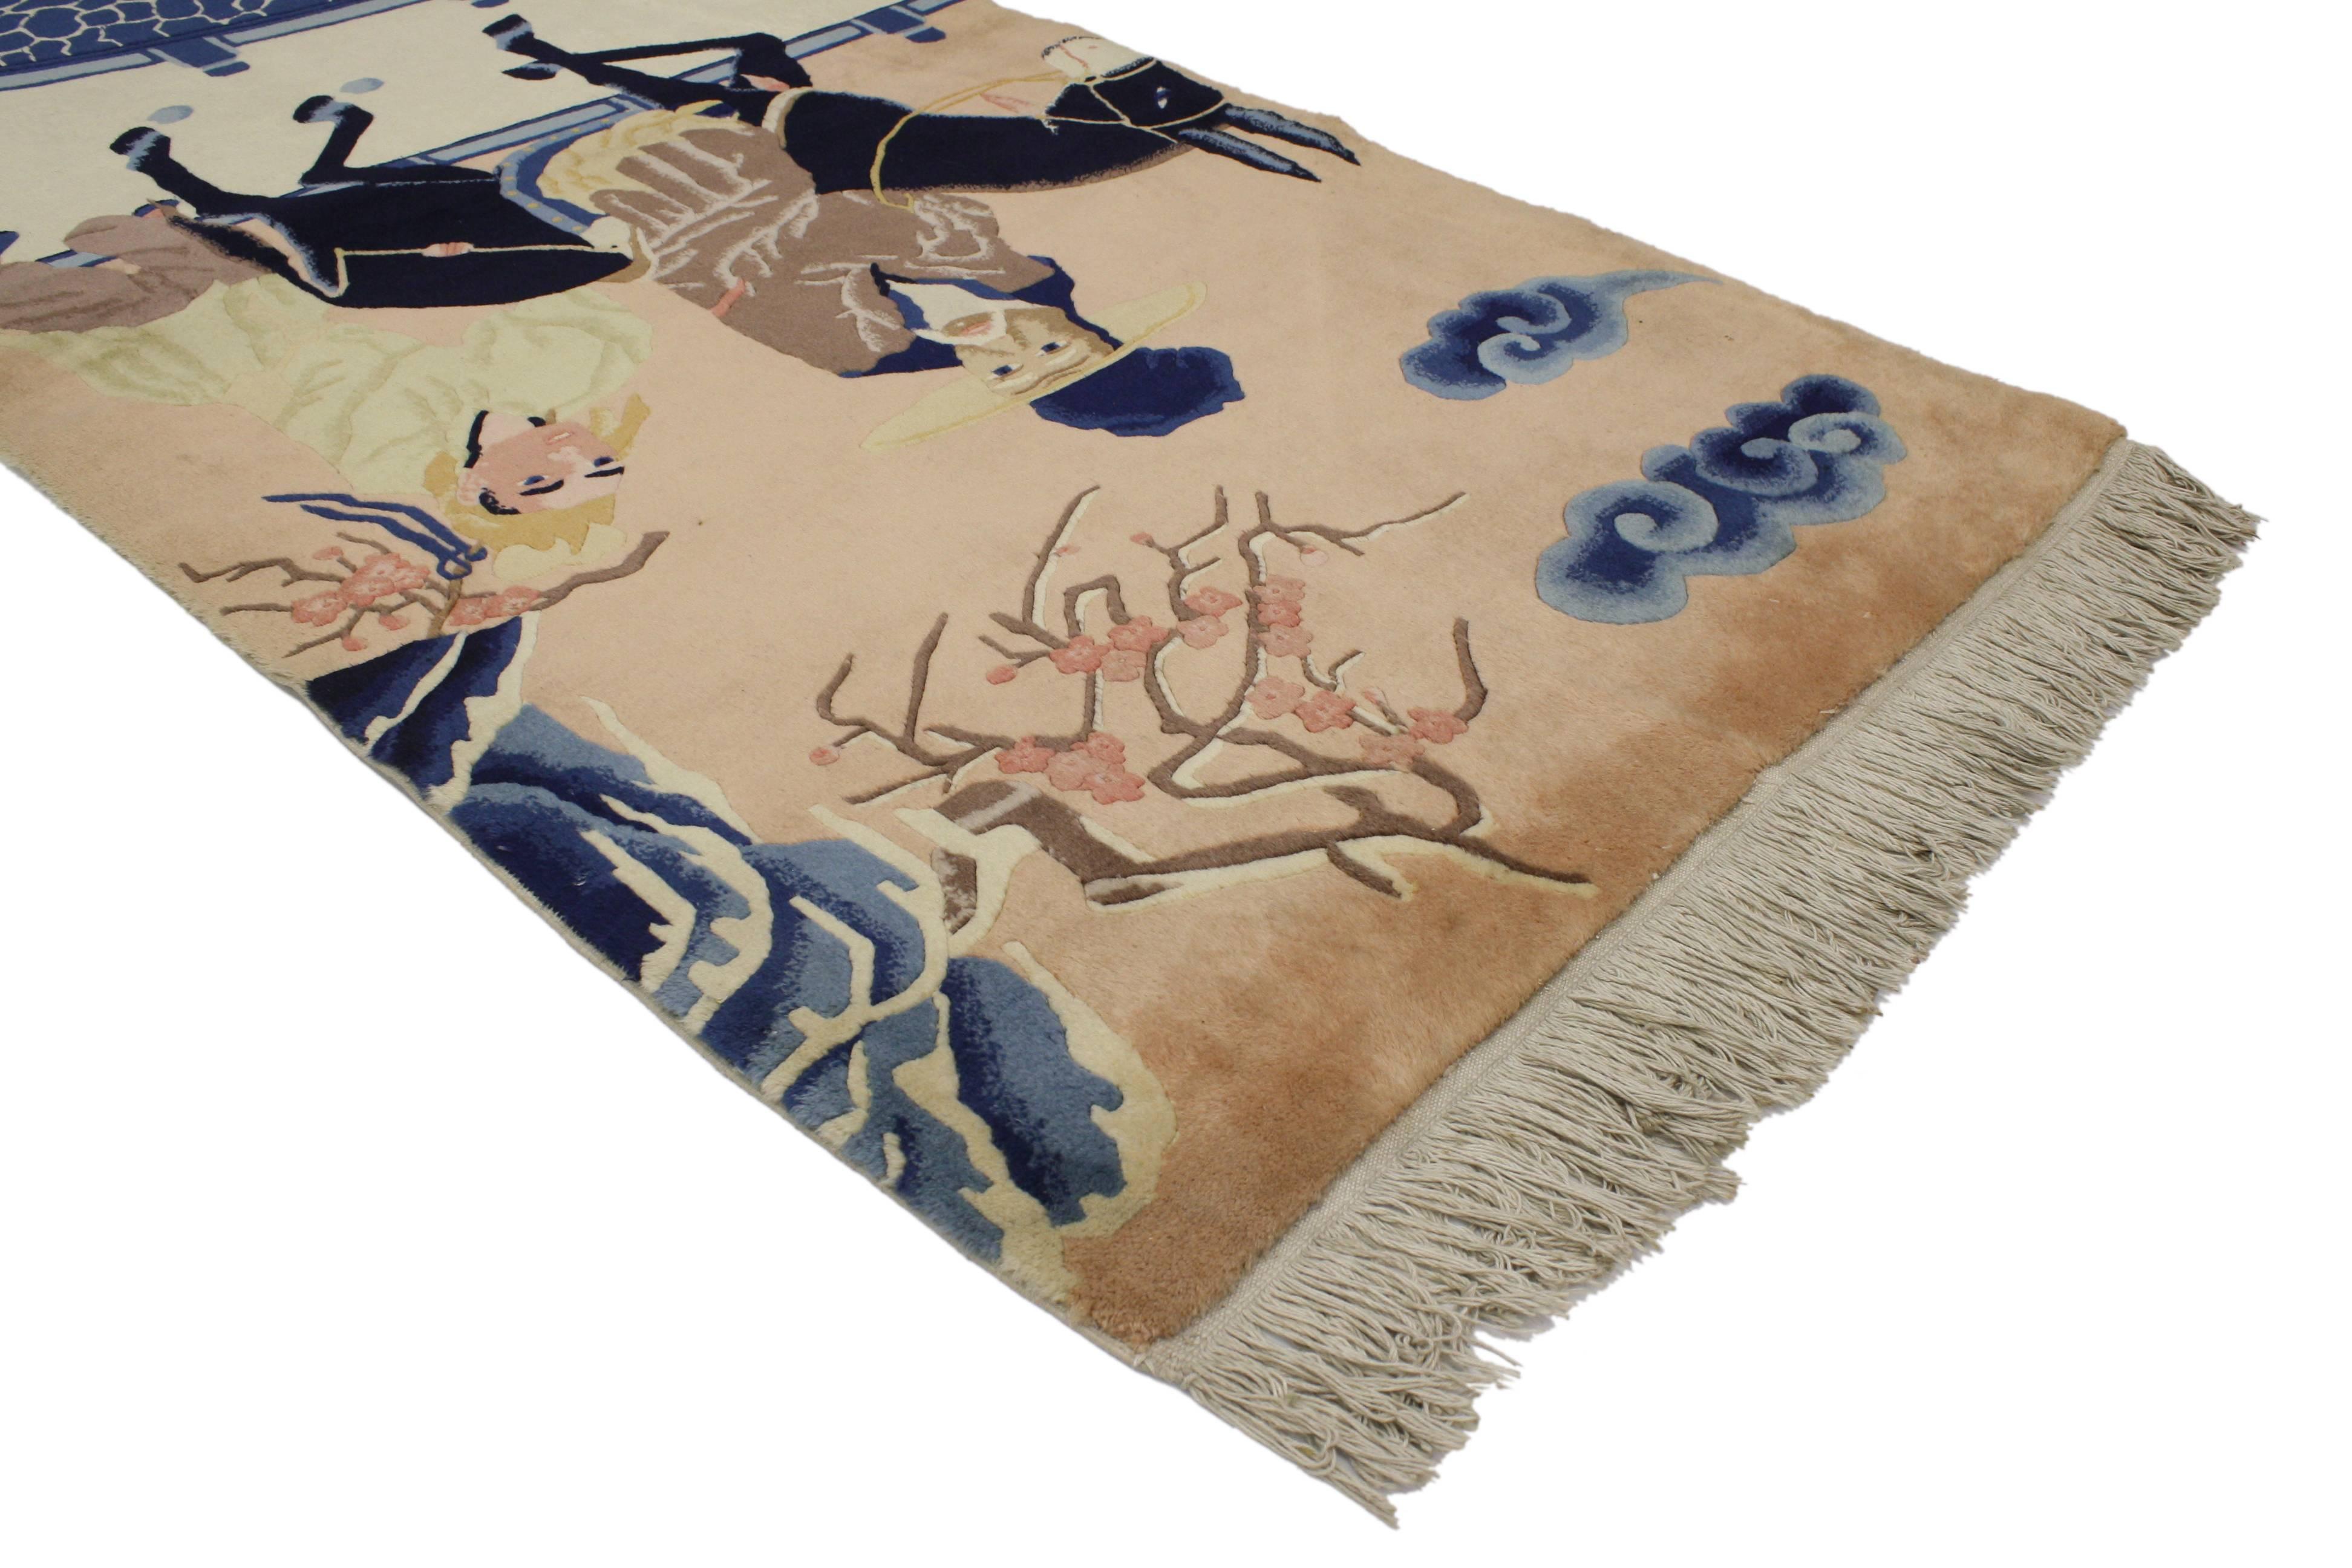 76960 Antique Chinese Art Deco Rug with Horse - Chinese Peking Pictorial Rug, Tapestry or Wall Hanging 02’07 x 04’11. Revitalize your space with this 1920s Chinese Art Deco displaying a Pictorial Directional view. A striking mix of blue and pink